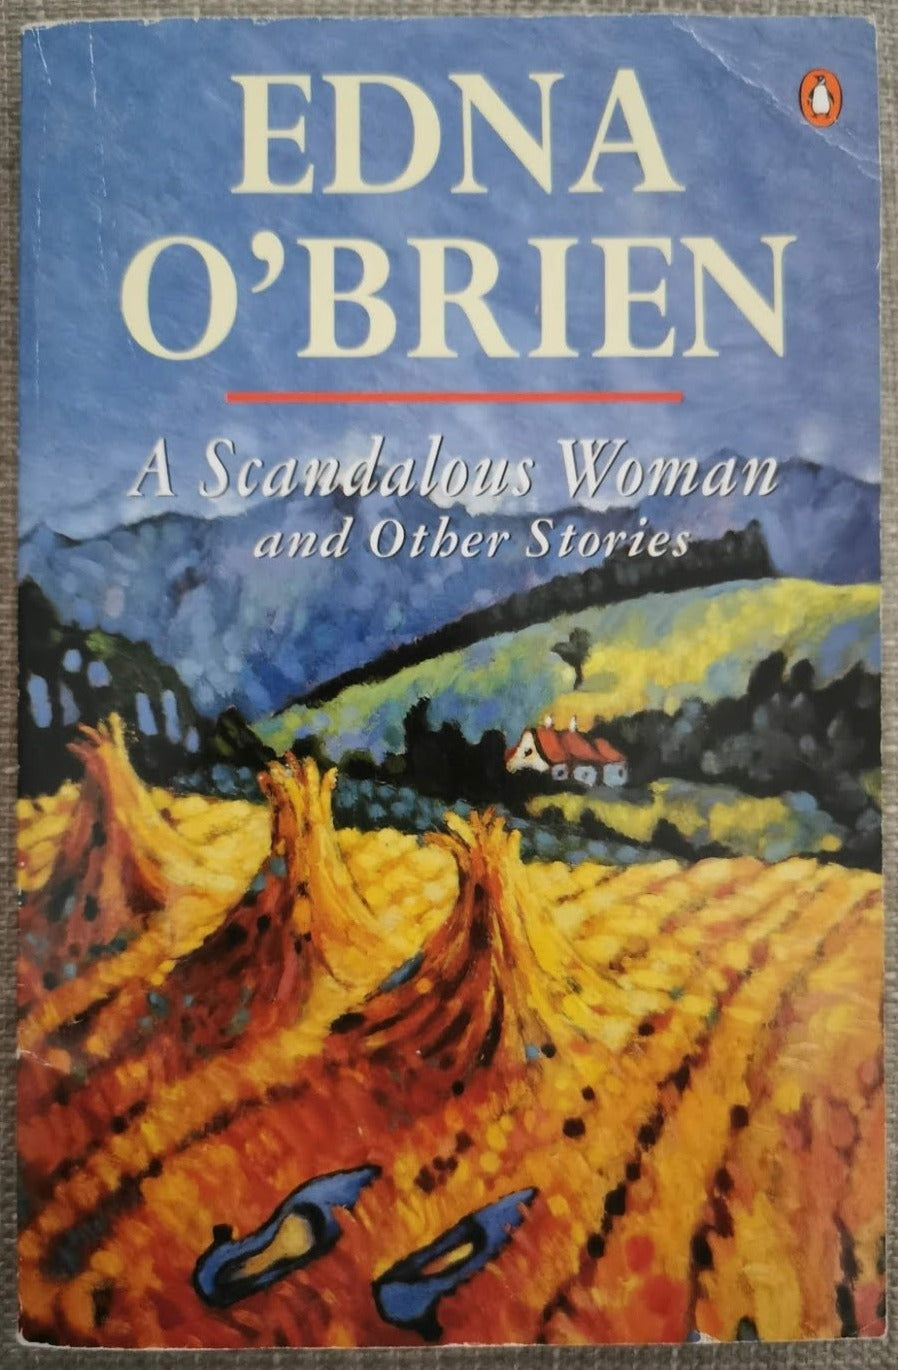 A Scandalous Woman and Other Stories by Edna O'brien